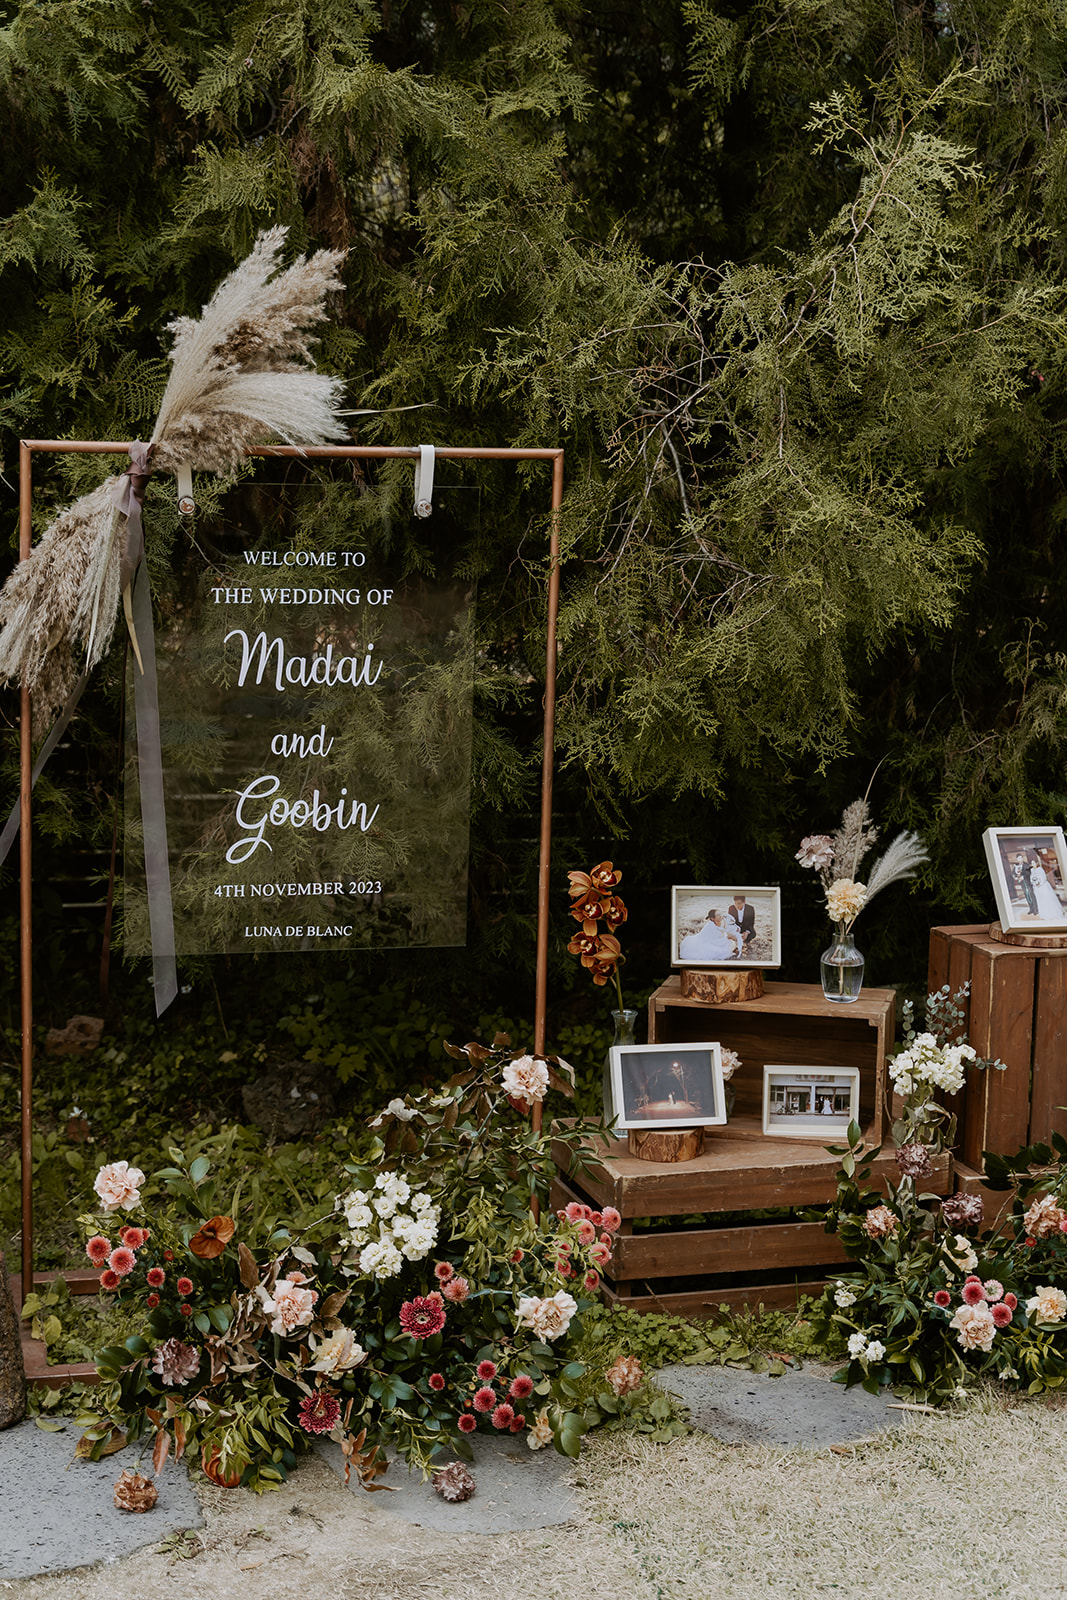 A rustic wedding welcome sign with the names "madai and gobin" surrounded by flowers and framed pictures.